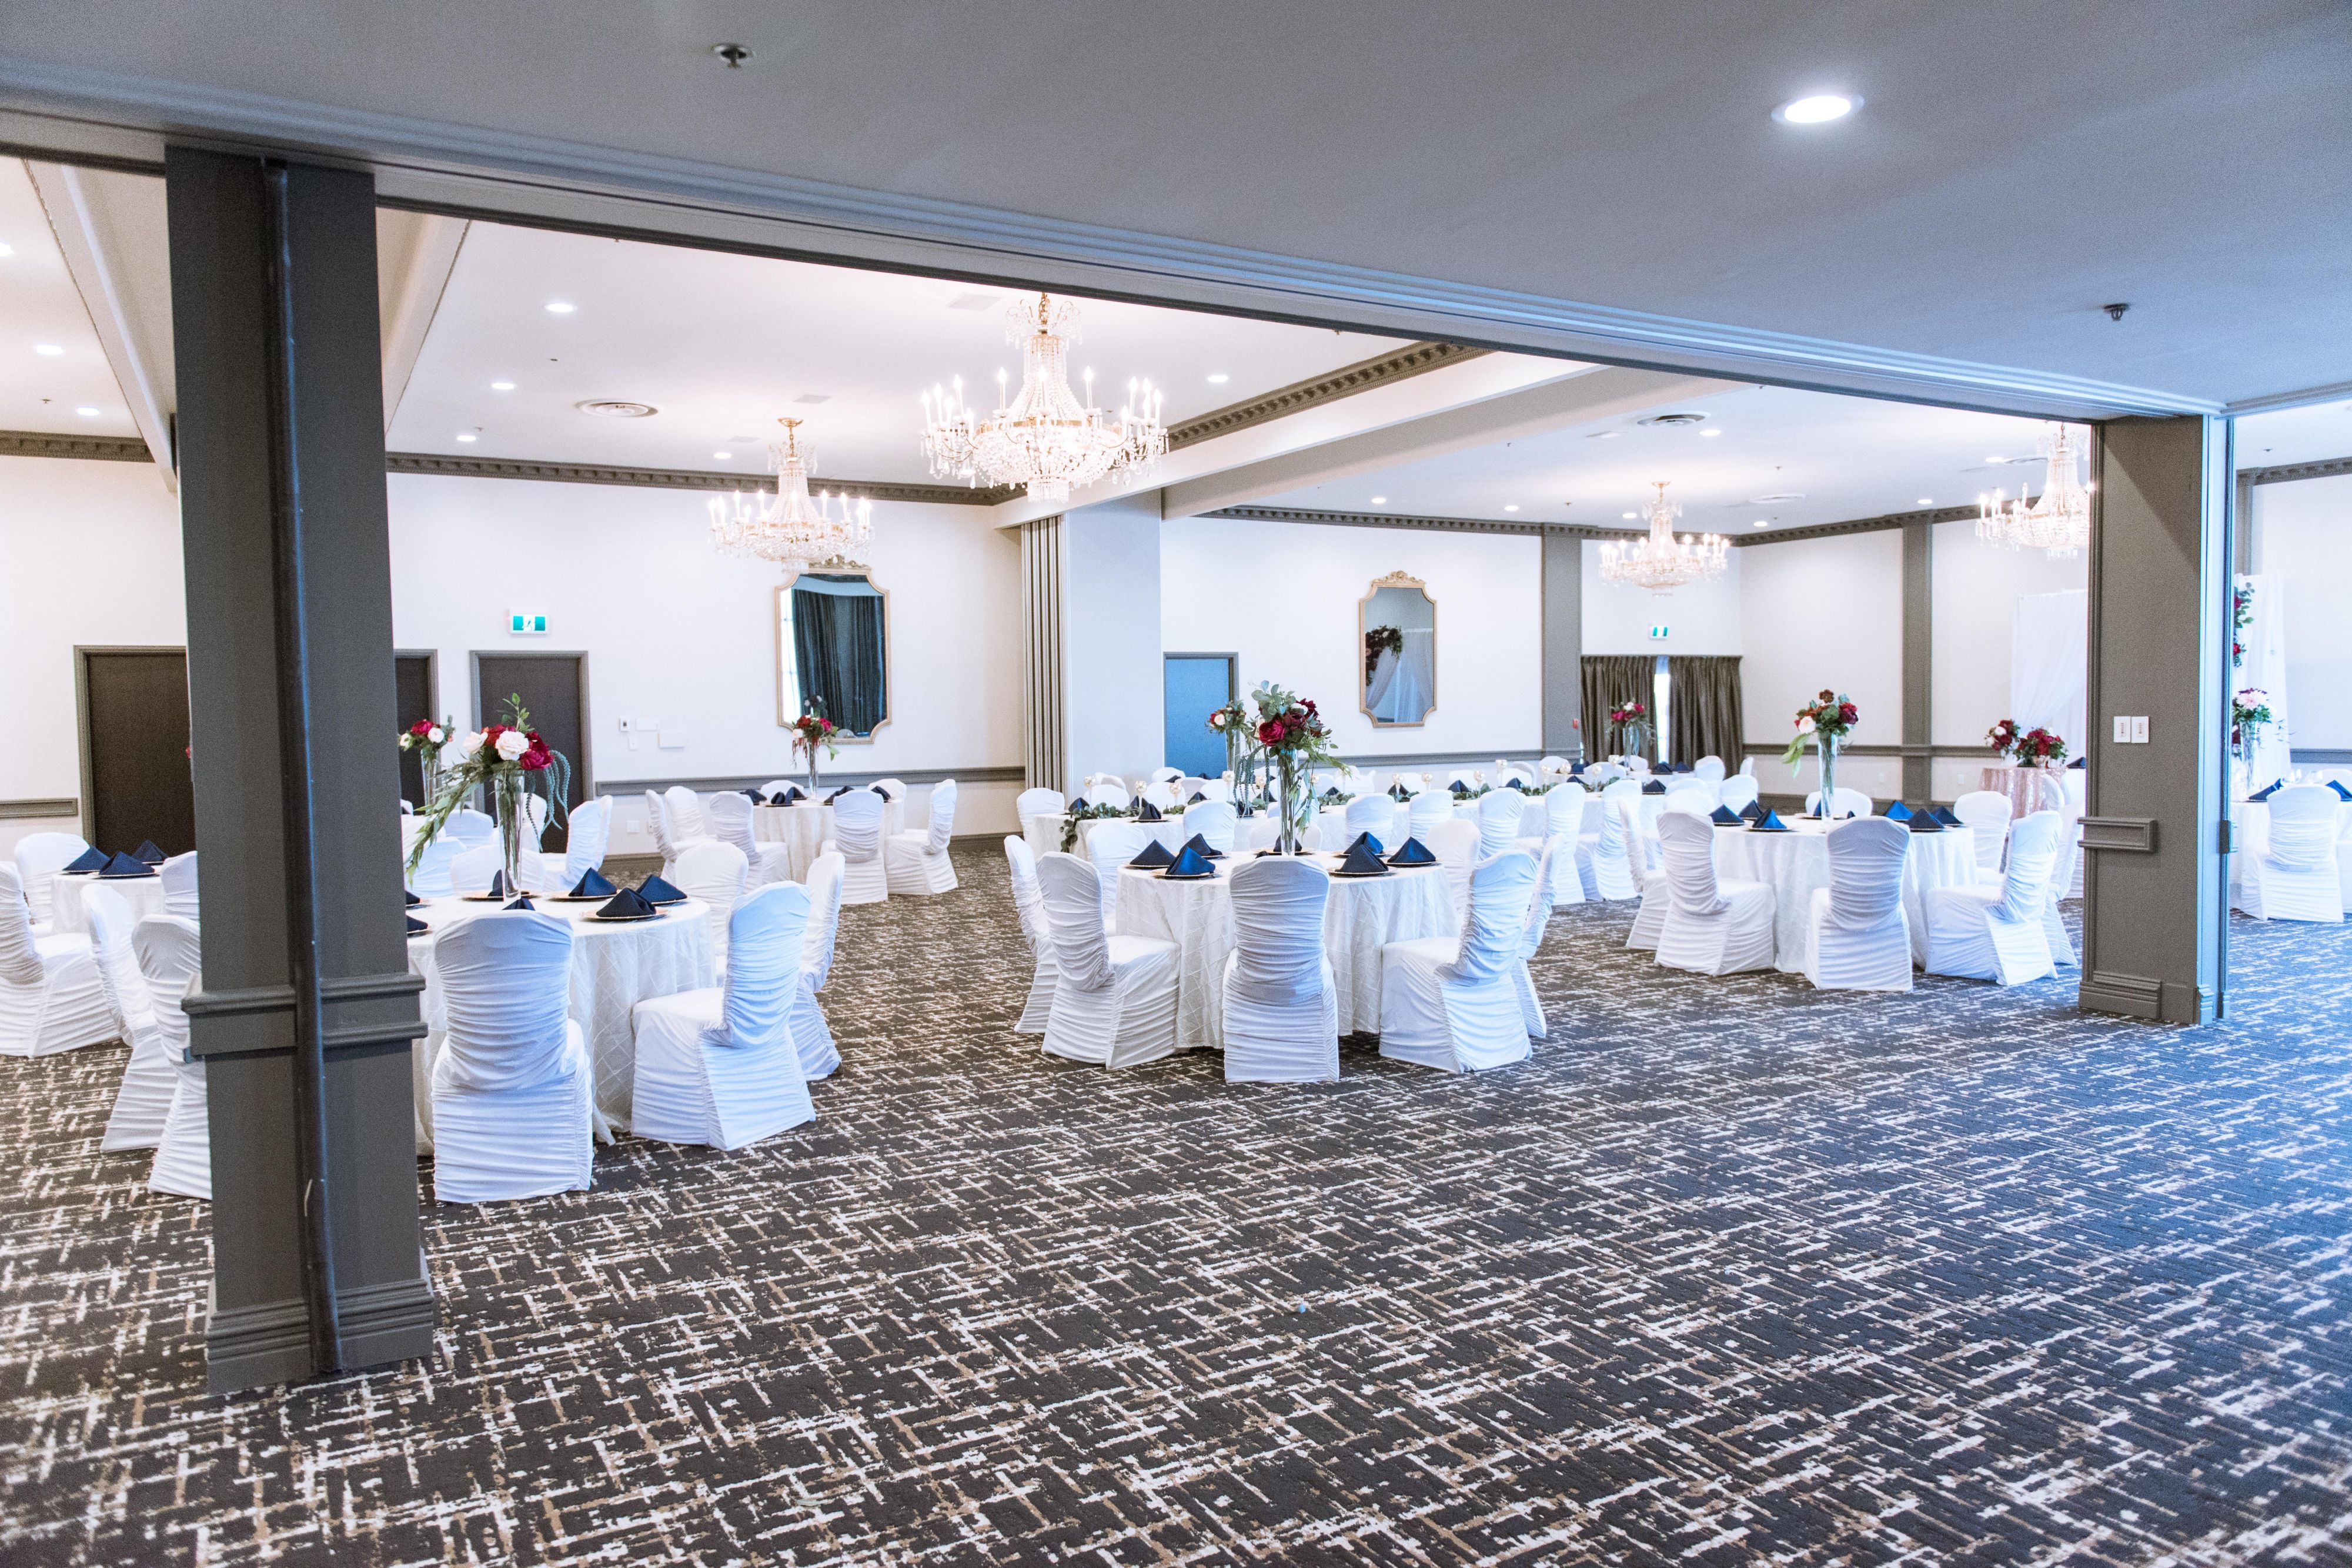 Let us take care of you and your event in our Ballroom